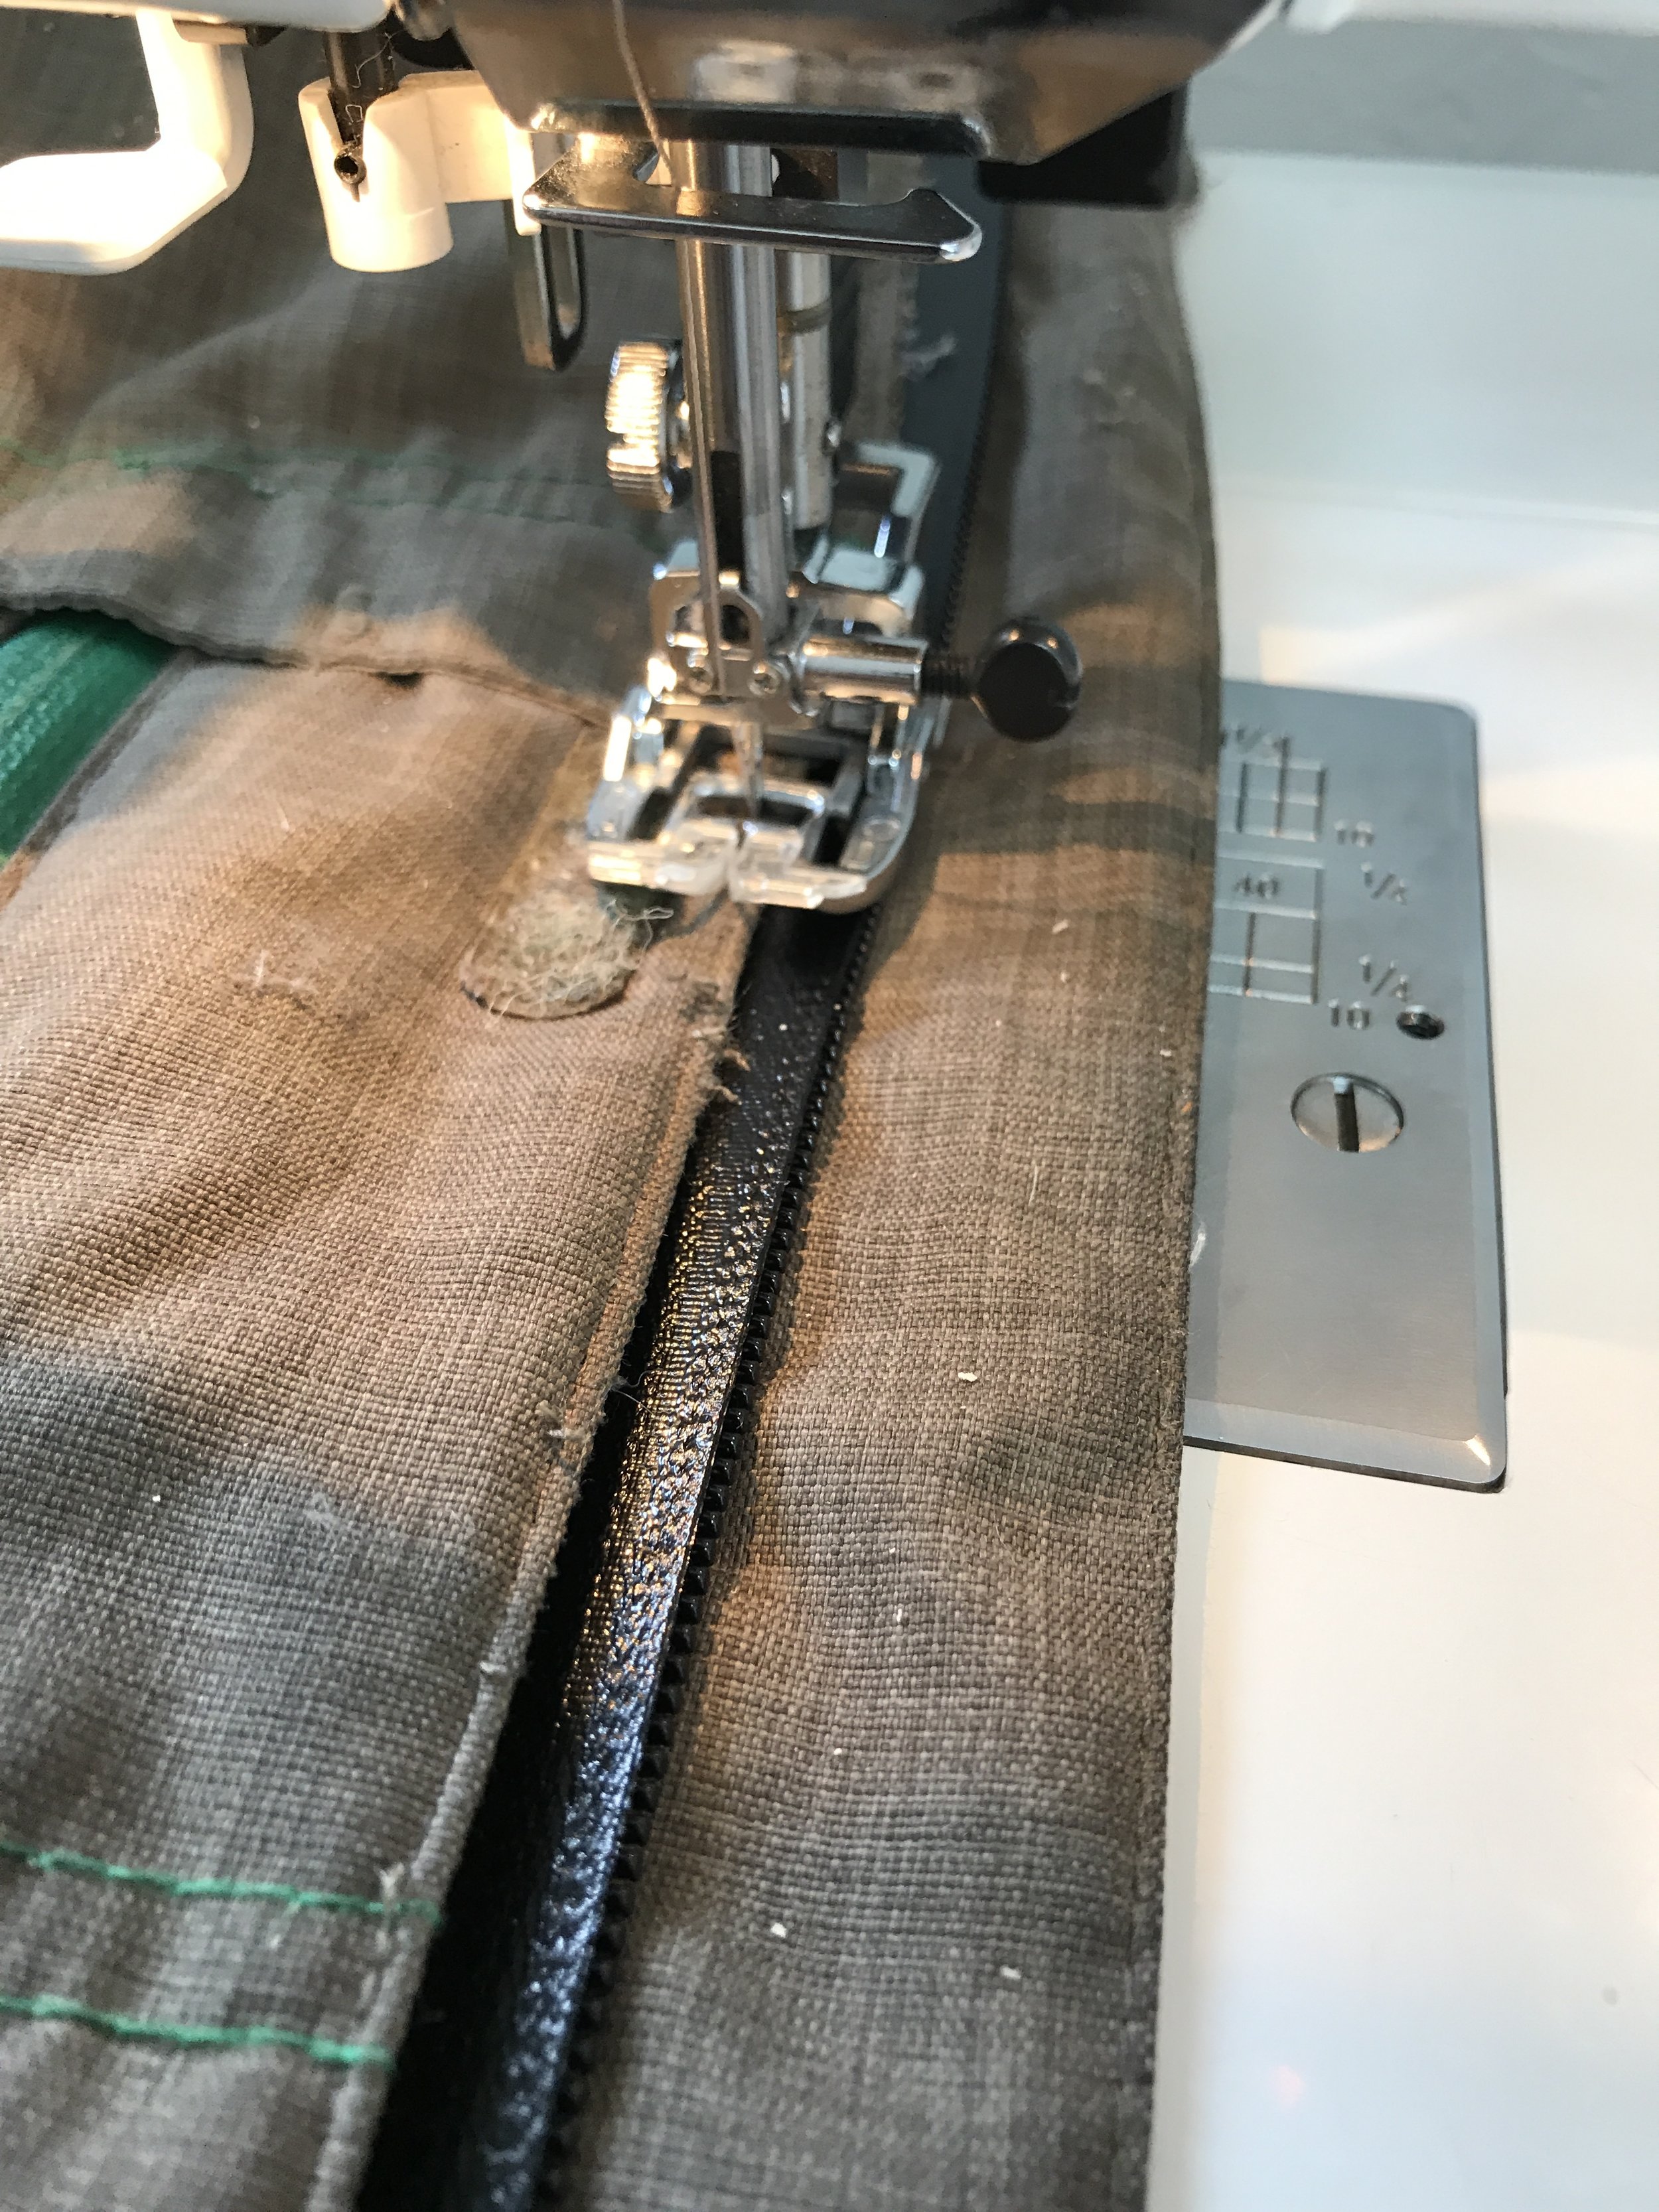 Outdoor Gear Repair - The Fixed Line - Replace Zippers in jackets